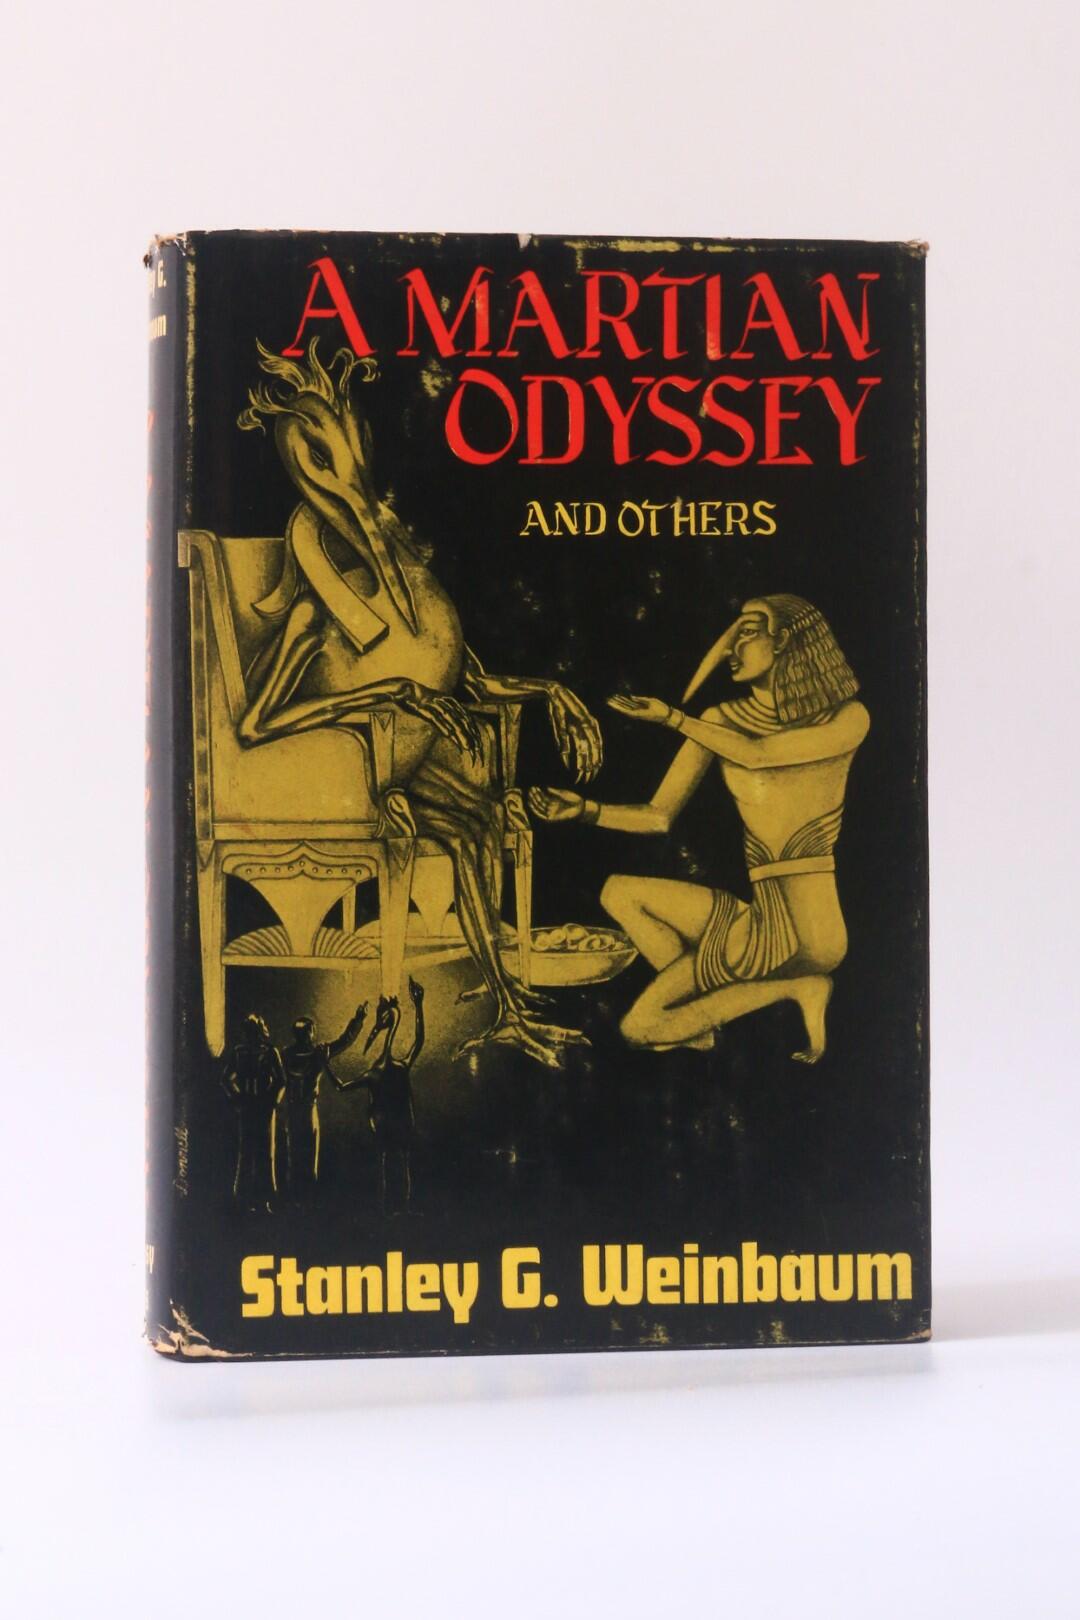 Stanley G. Weinbaum - A Martian Odyssey and Others - Fantasy Press, 1949, First Edition.